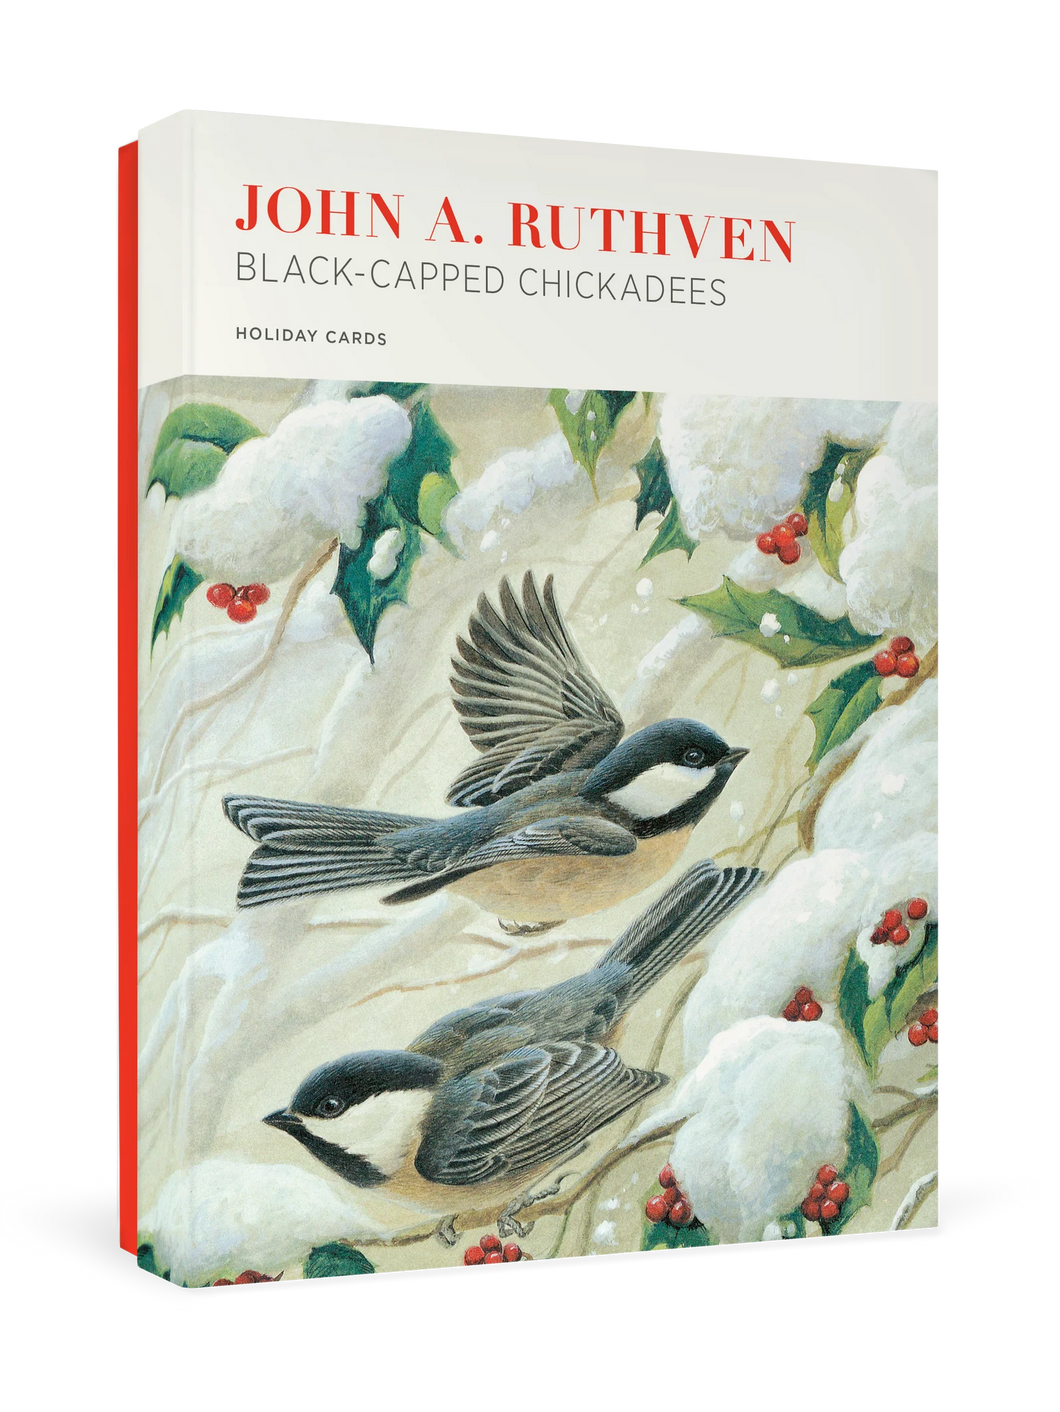 john a. ruthven - black-capped chickadees -  boxed holiday cards